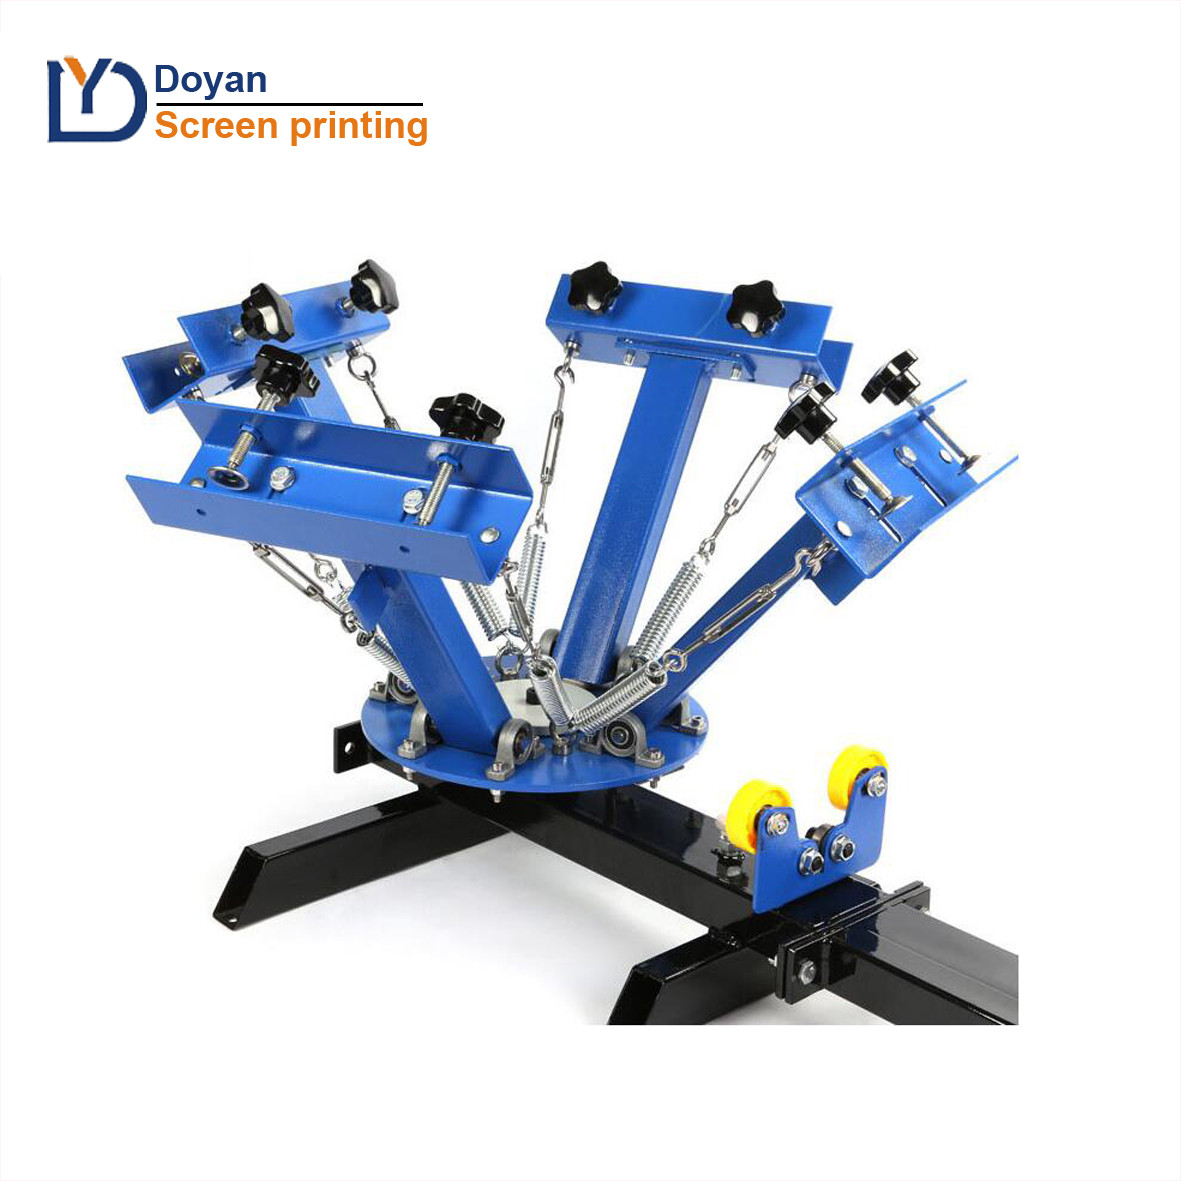 Technical points of screen printing machine in the printing process